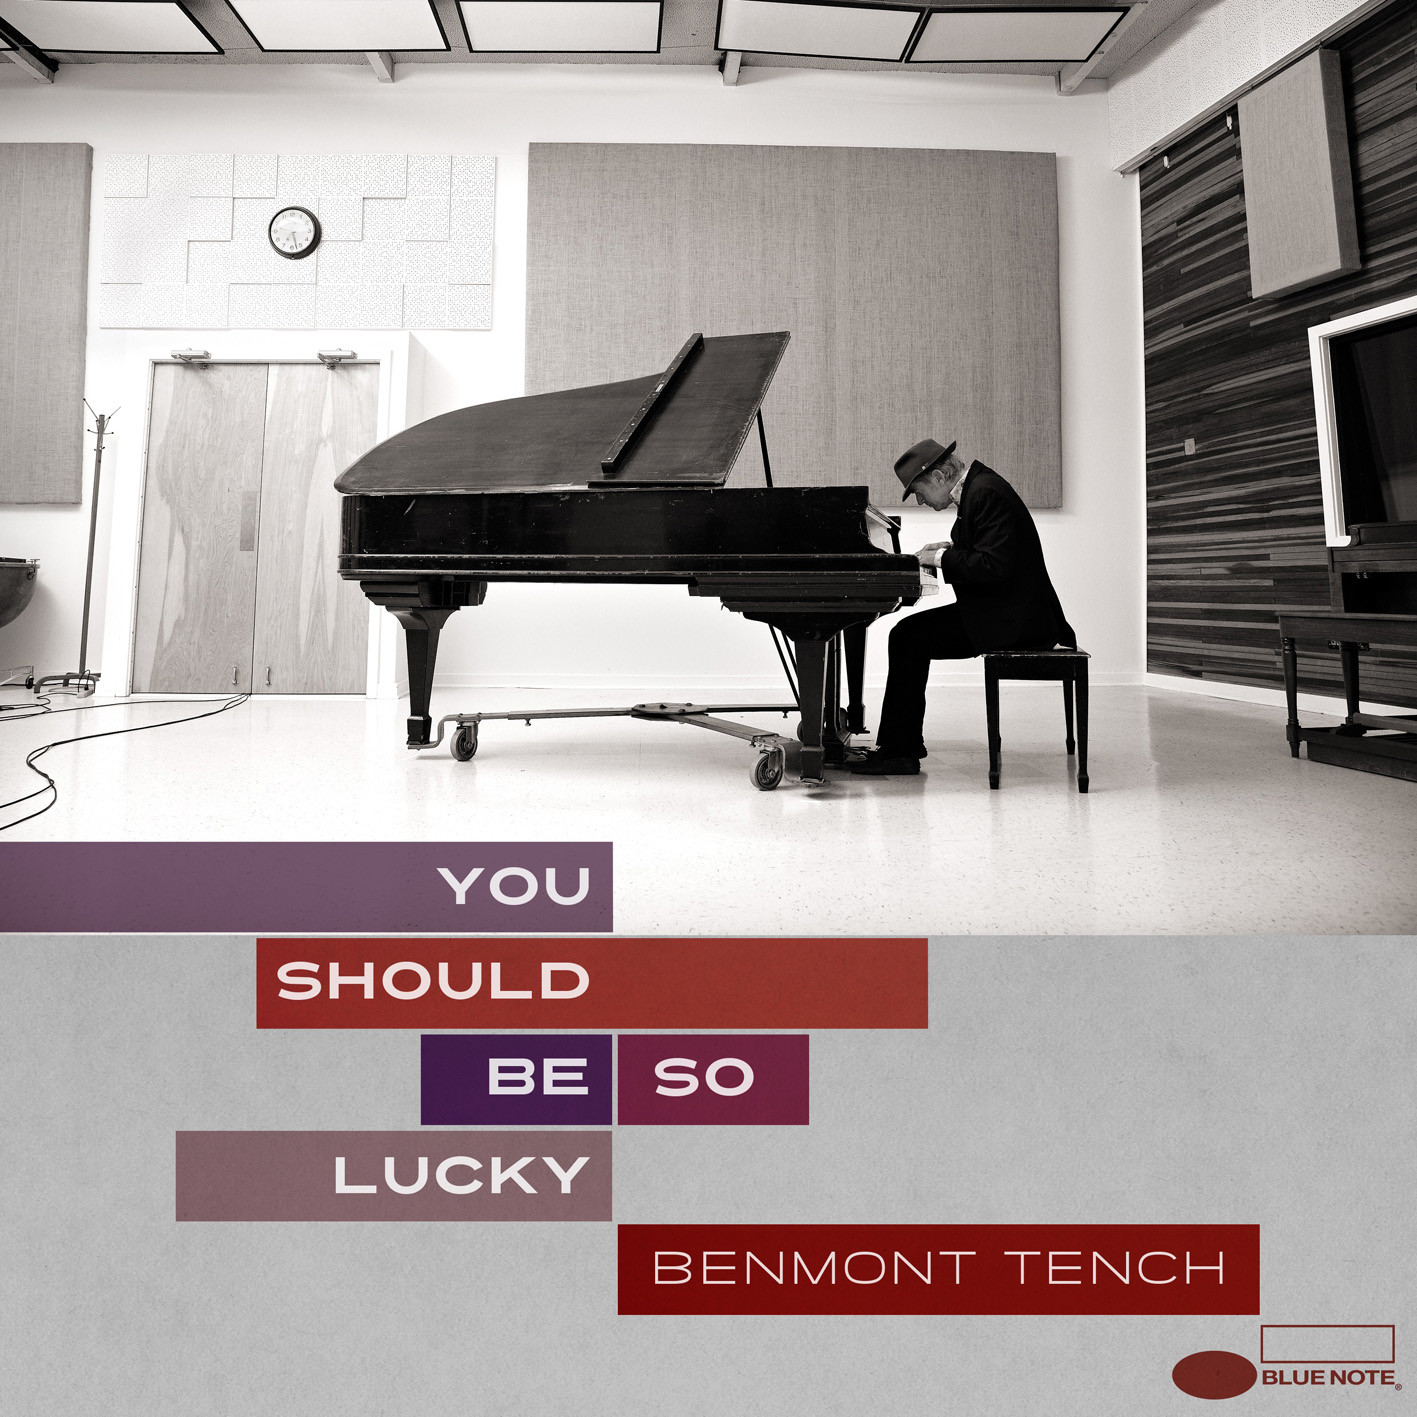 Benmont Tench - You Should Be So Lucky (2014) [HDTracks FLAC 24bit/96kHz]